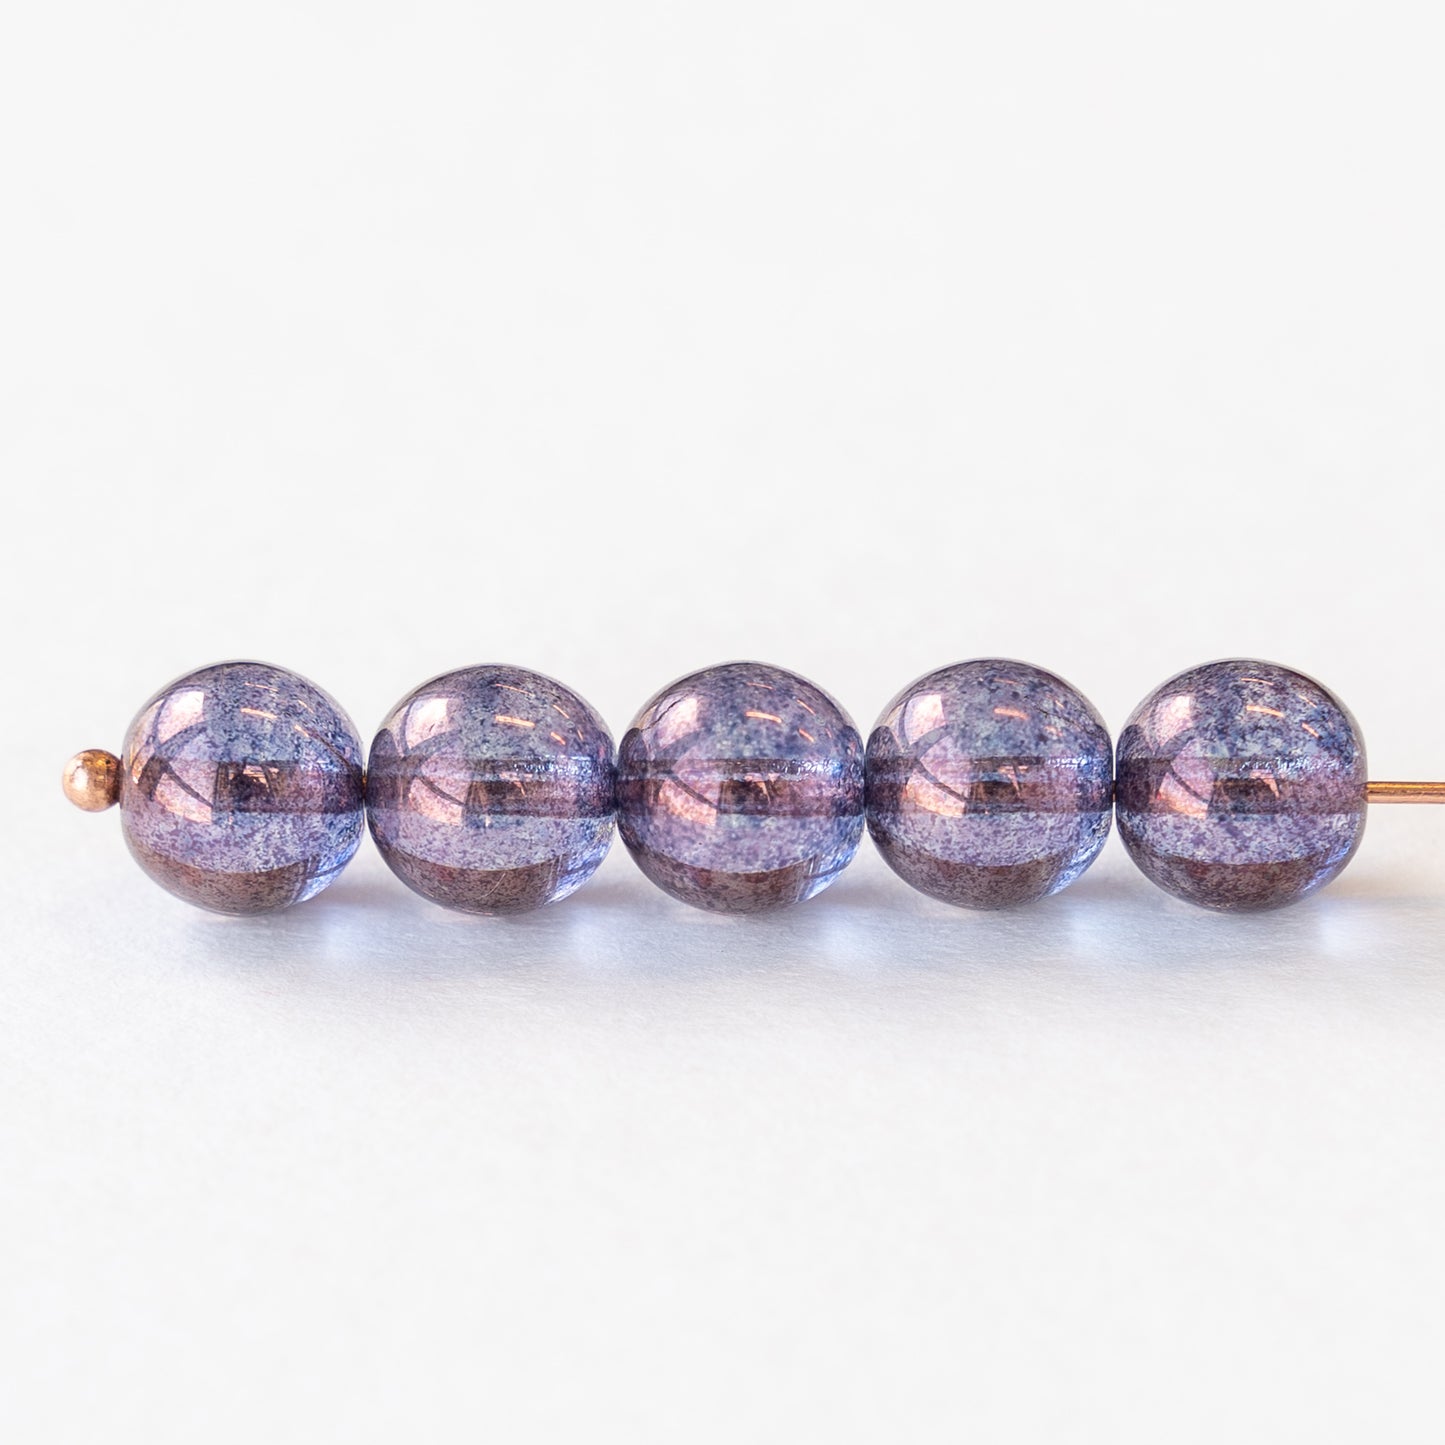 8mm Round Glass Beads - Blue and Purple Bronze Luster - 25 Beads